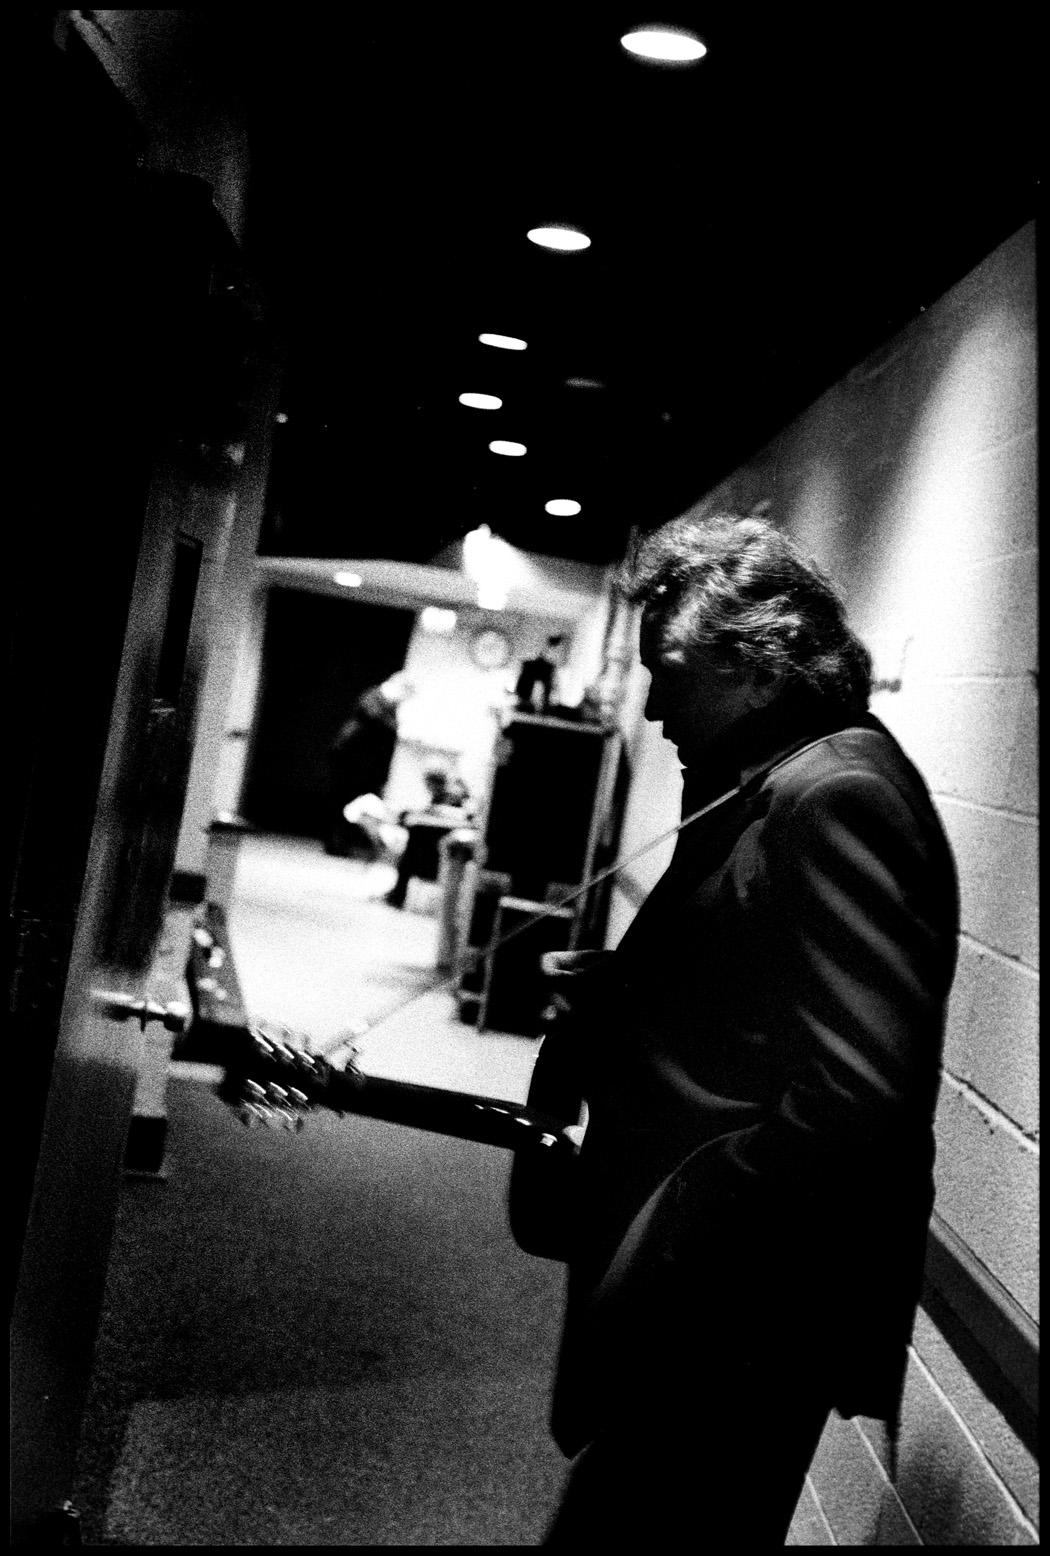 Danny Clinch Black and White Photograph - Johnny Cash Waiting in a Hallway